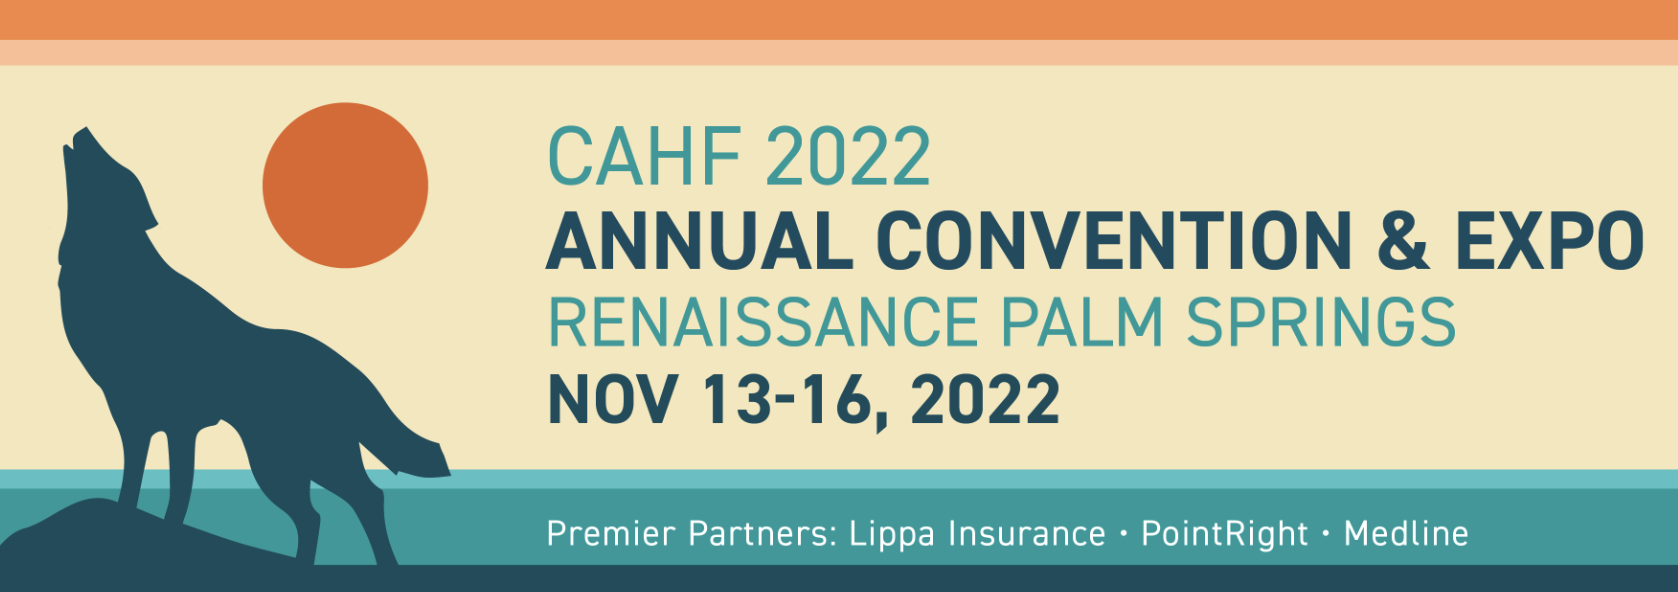 CAHF 2022 Annual Convention & Expo IntelyCare